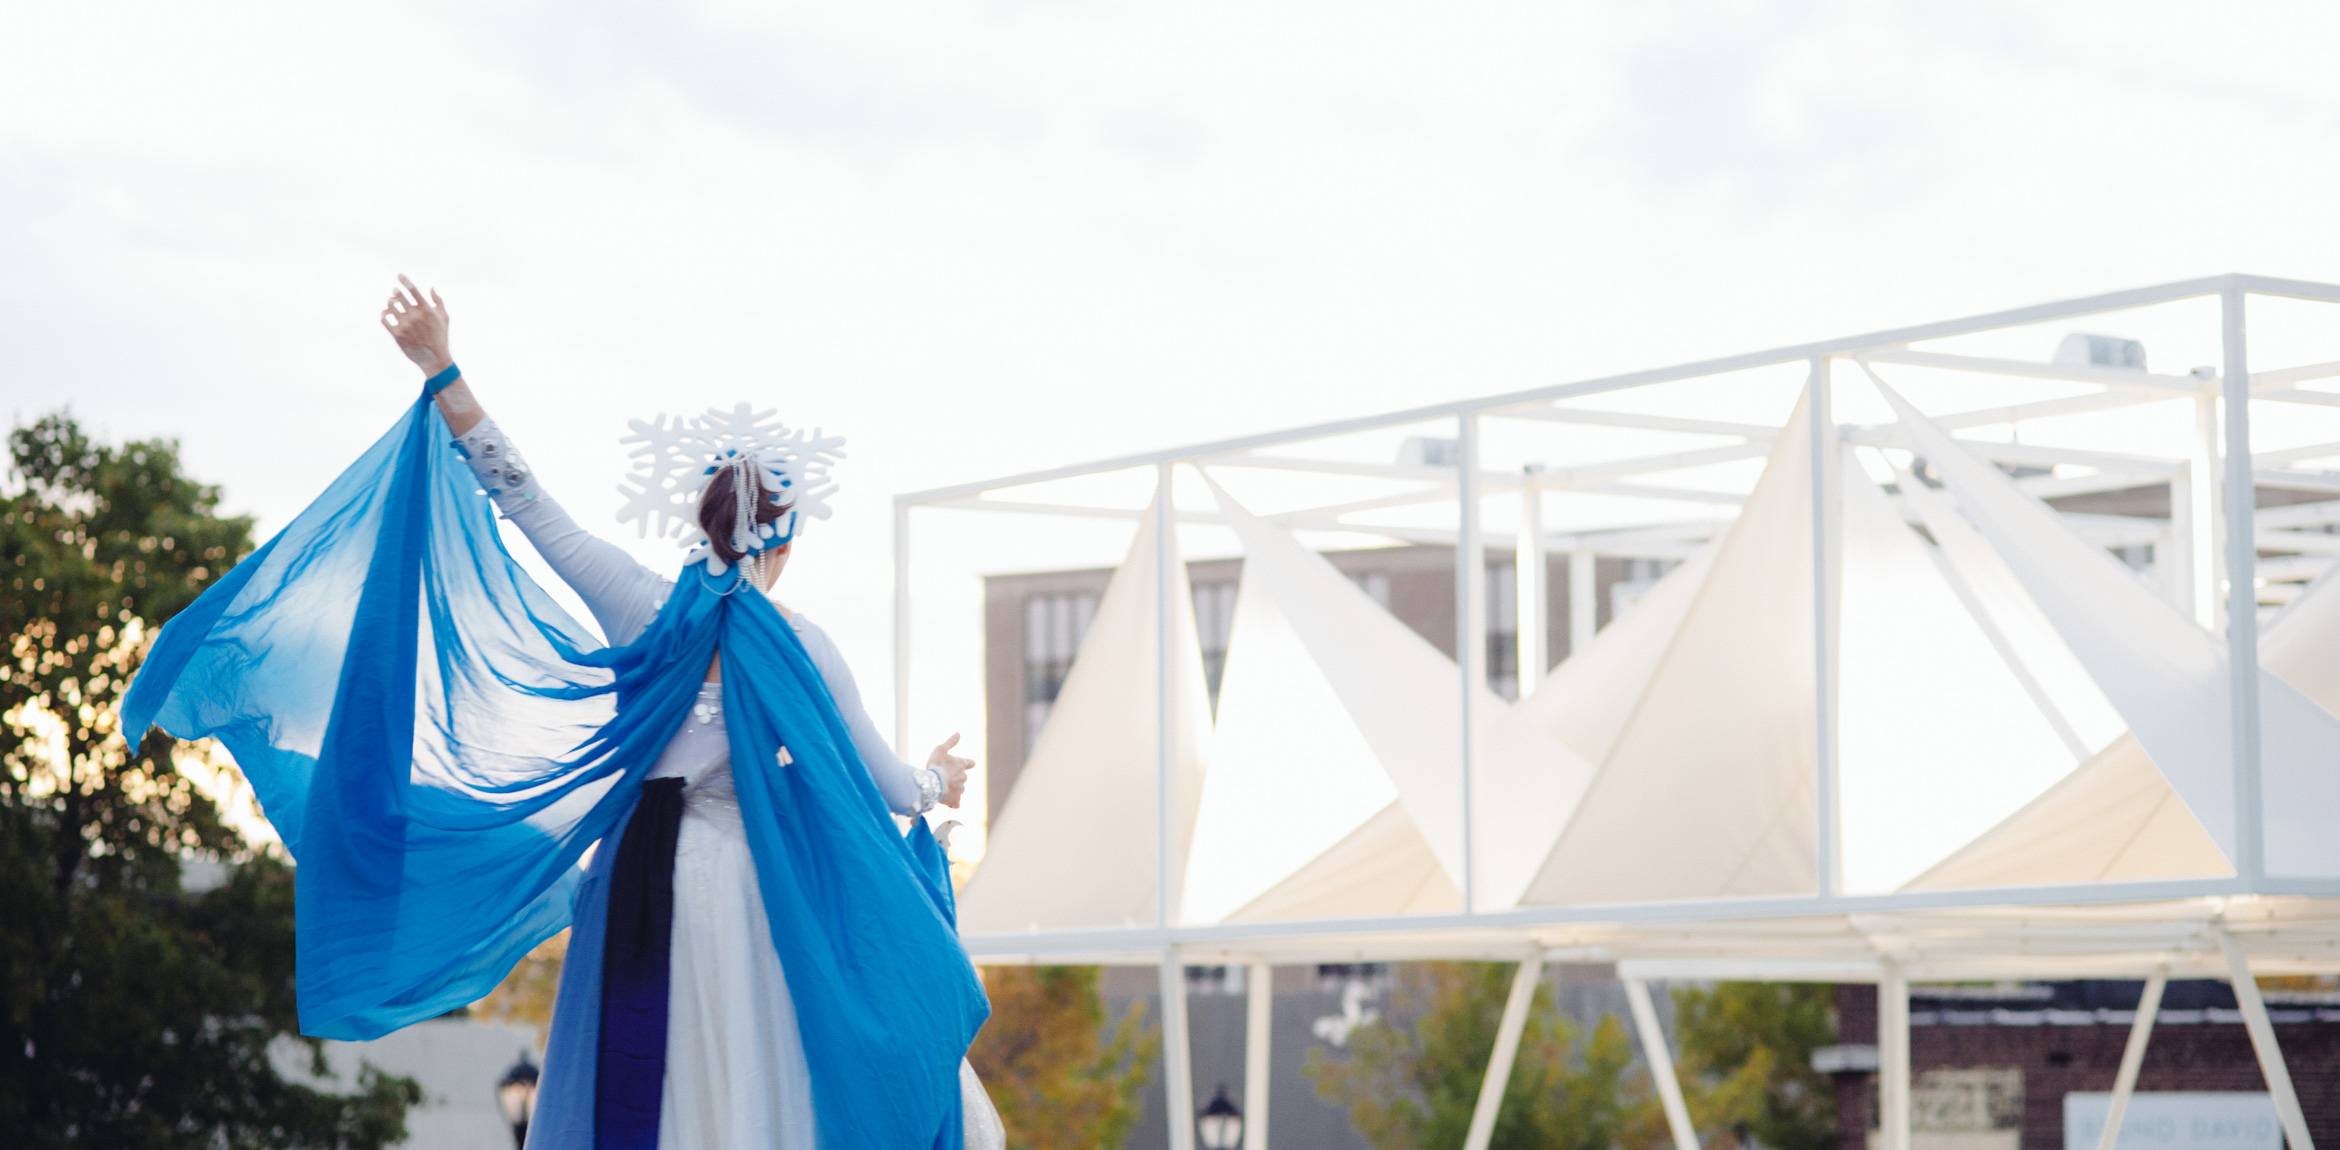 A performer wearing a white and blue flowing outfit with a snowflake headpiece raises an arm and dances, the Lots installation in the background.